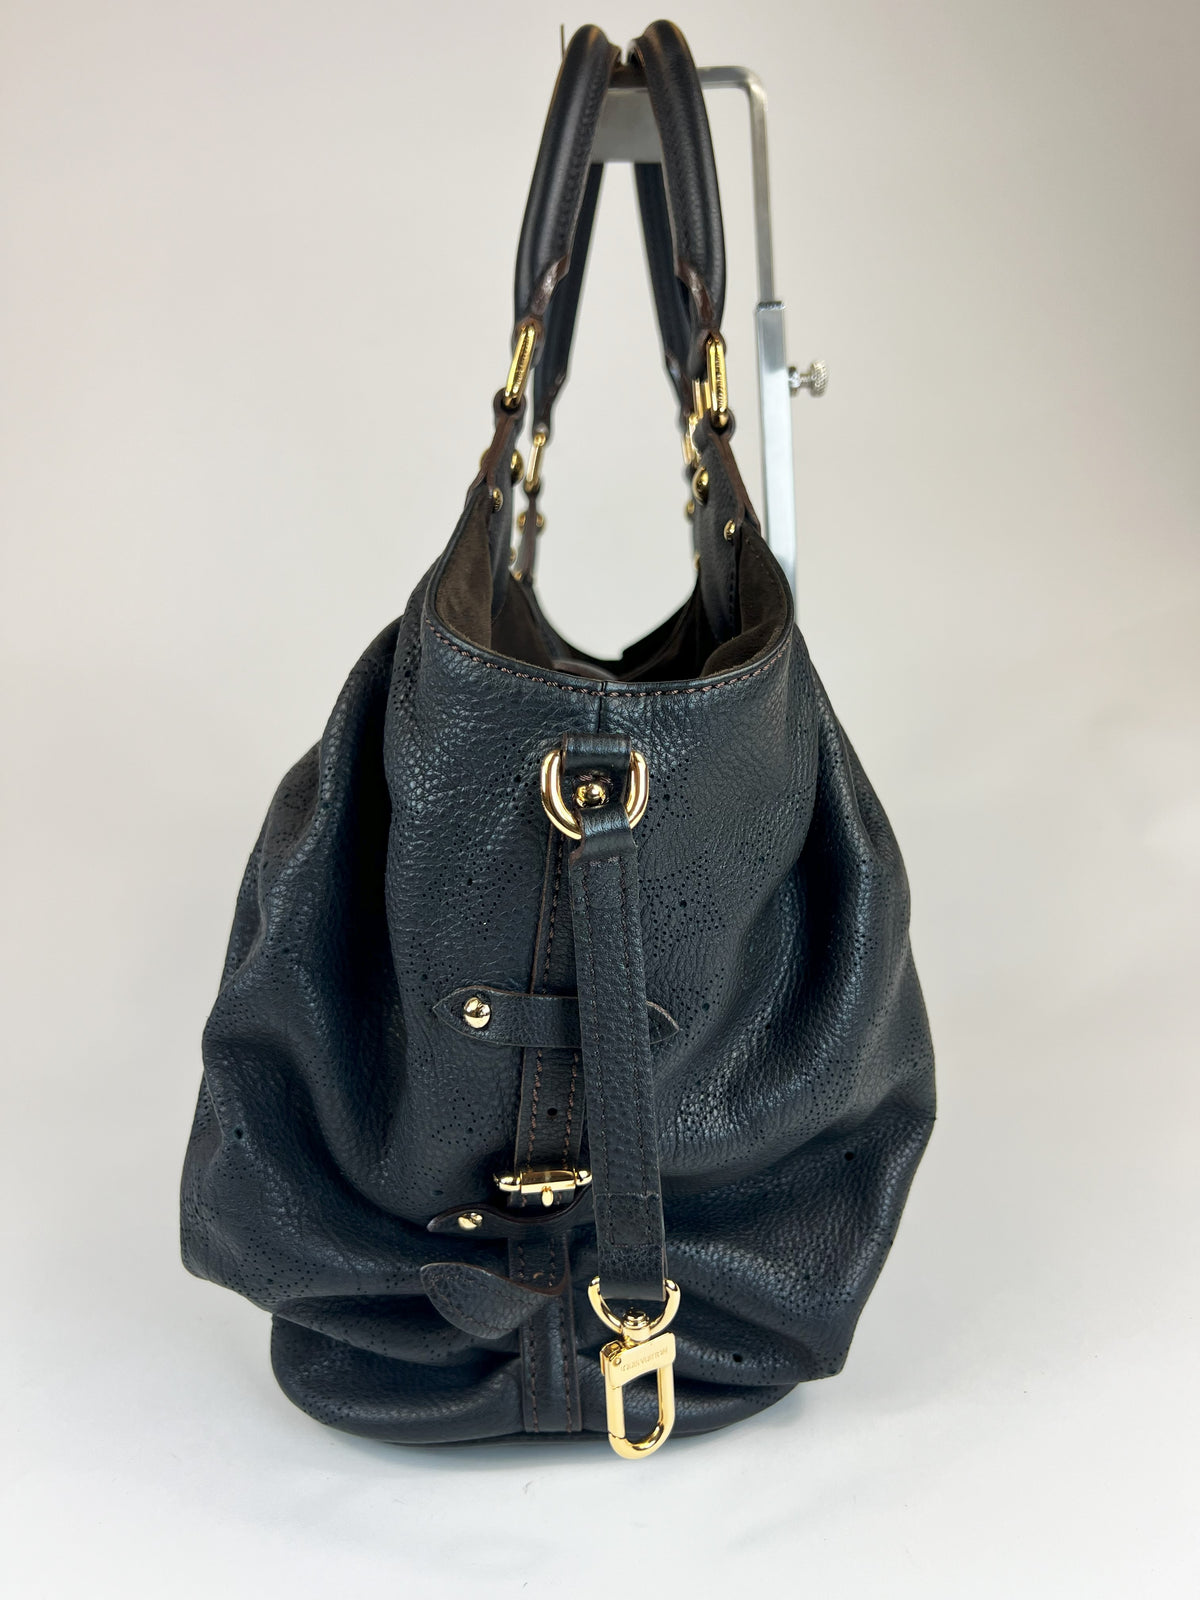 Excellent Pre-Loved Black Grained Leather with Perforated Monogram Pattern Large Tote Bag.(side)